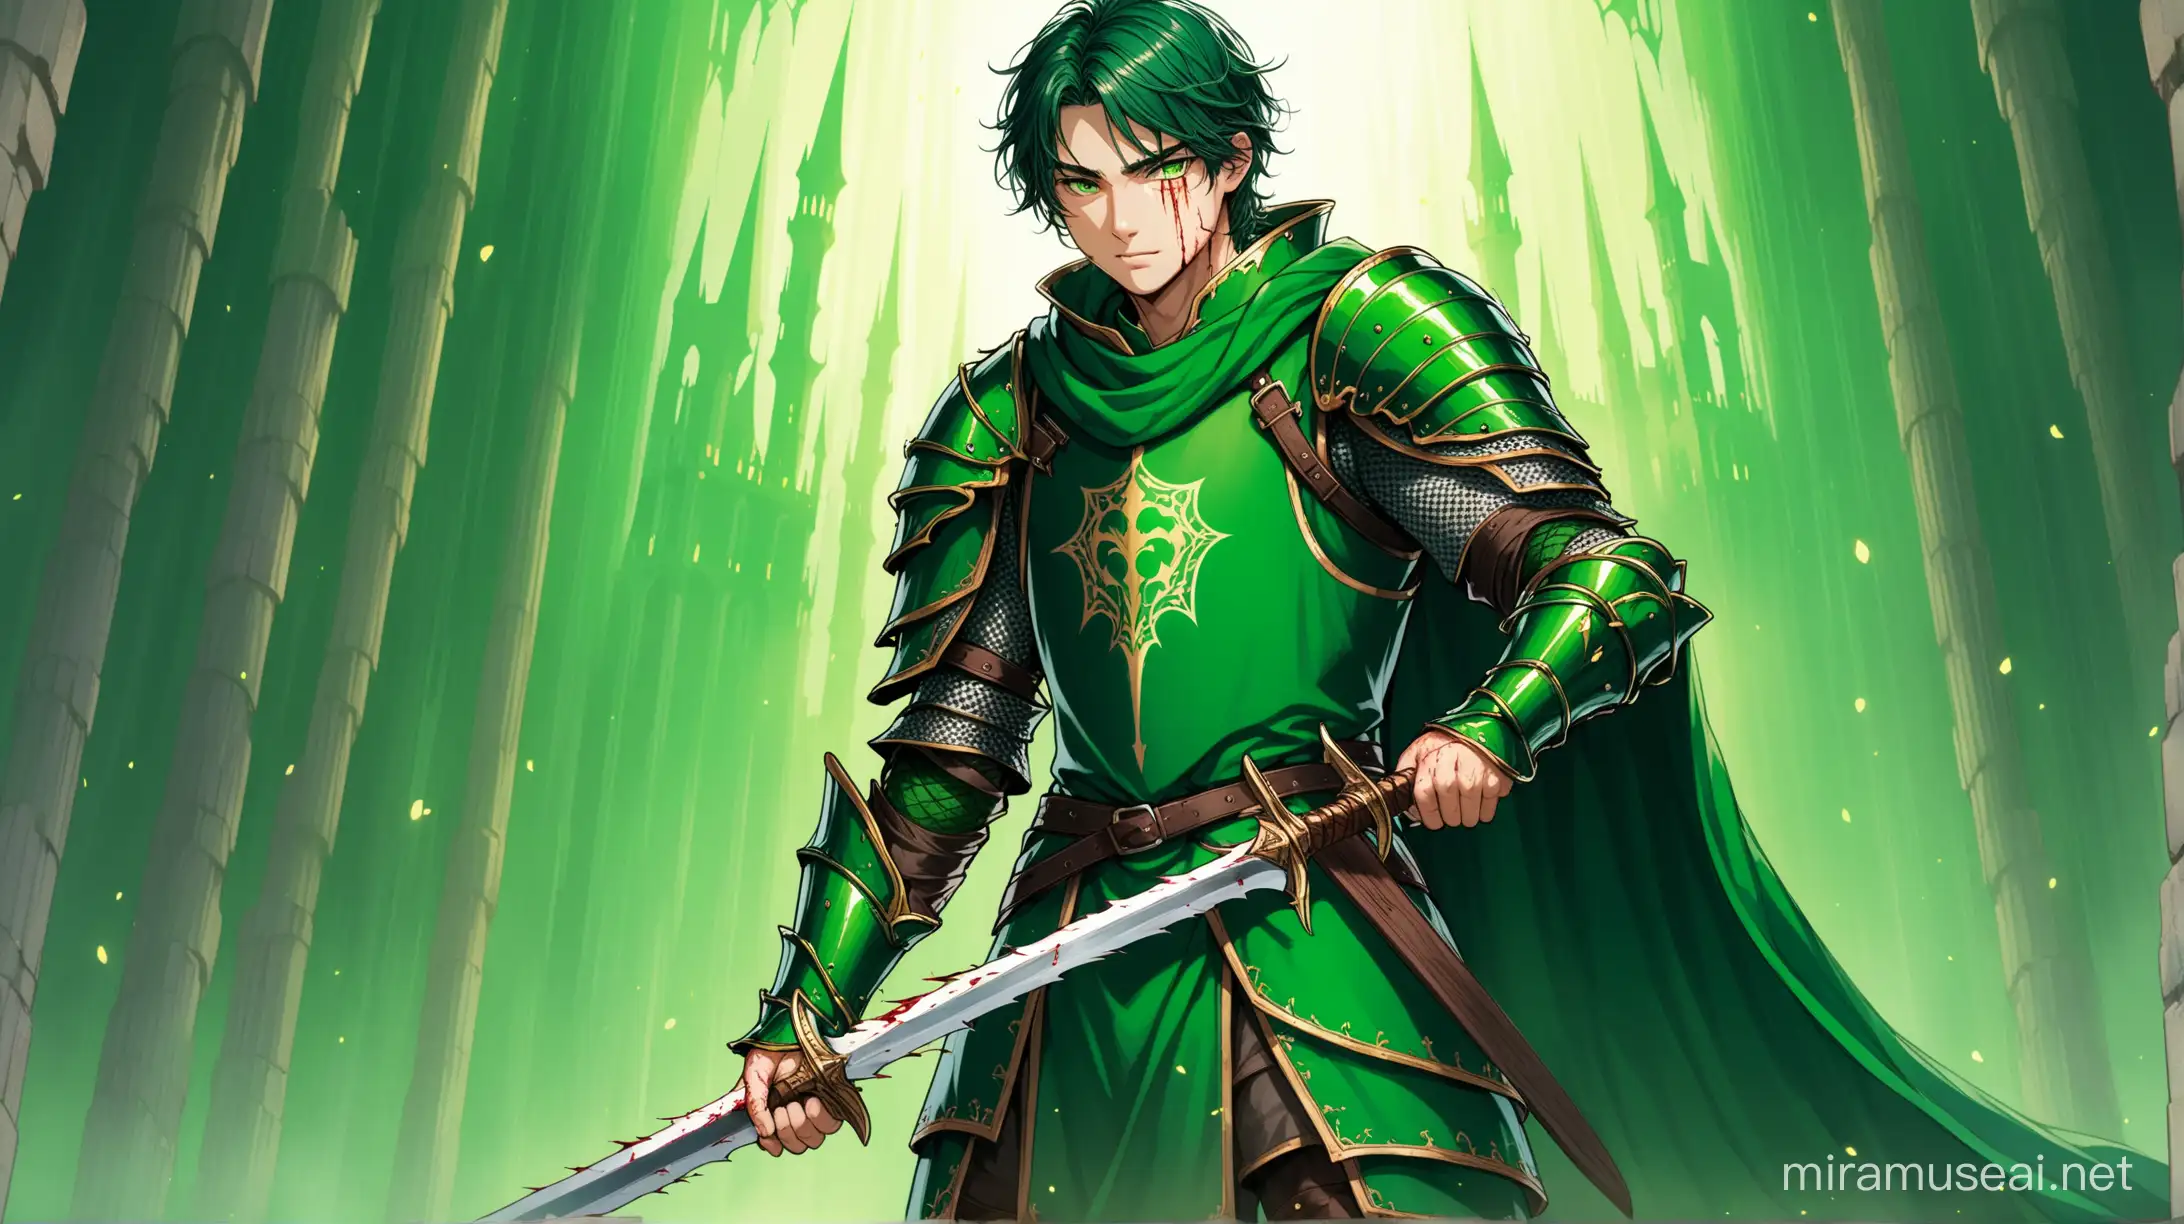 Resilient Young Knight in Green Armor with Wounded Arm Holding Sword